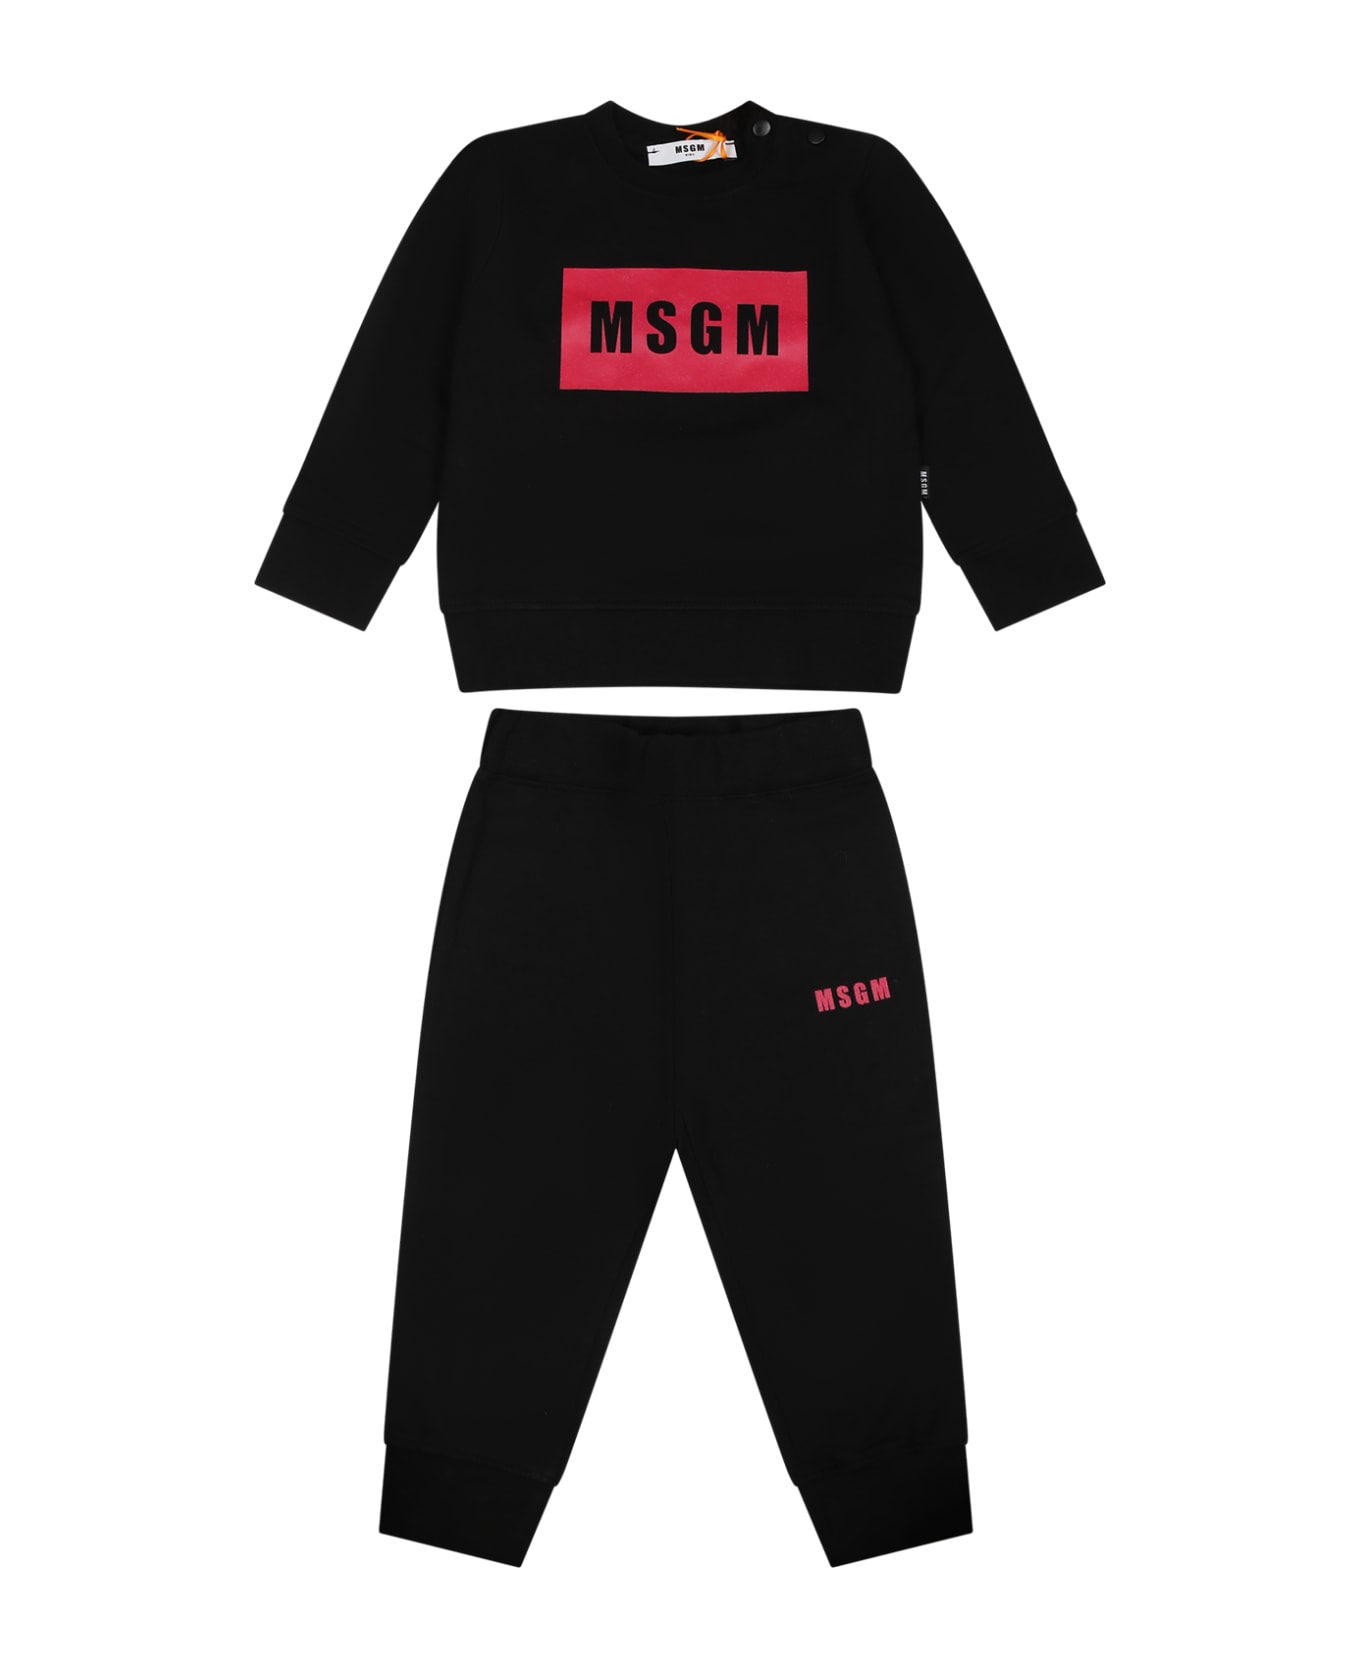 MSGM Black Suit For Baby Girl With Logo - Black ボトムス